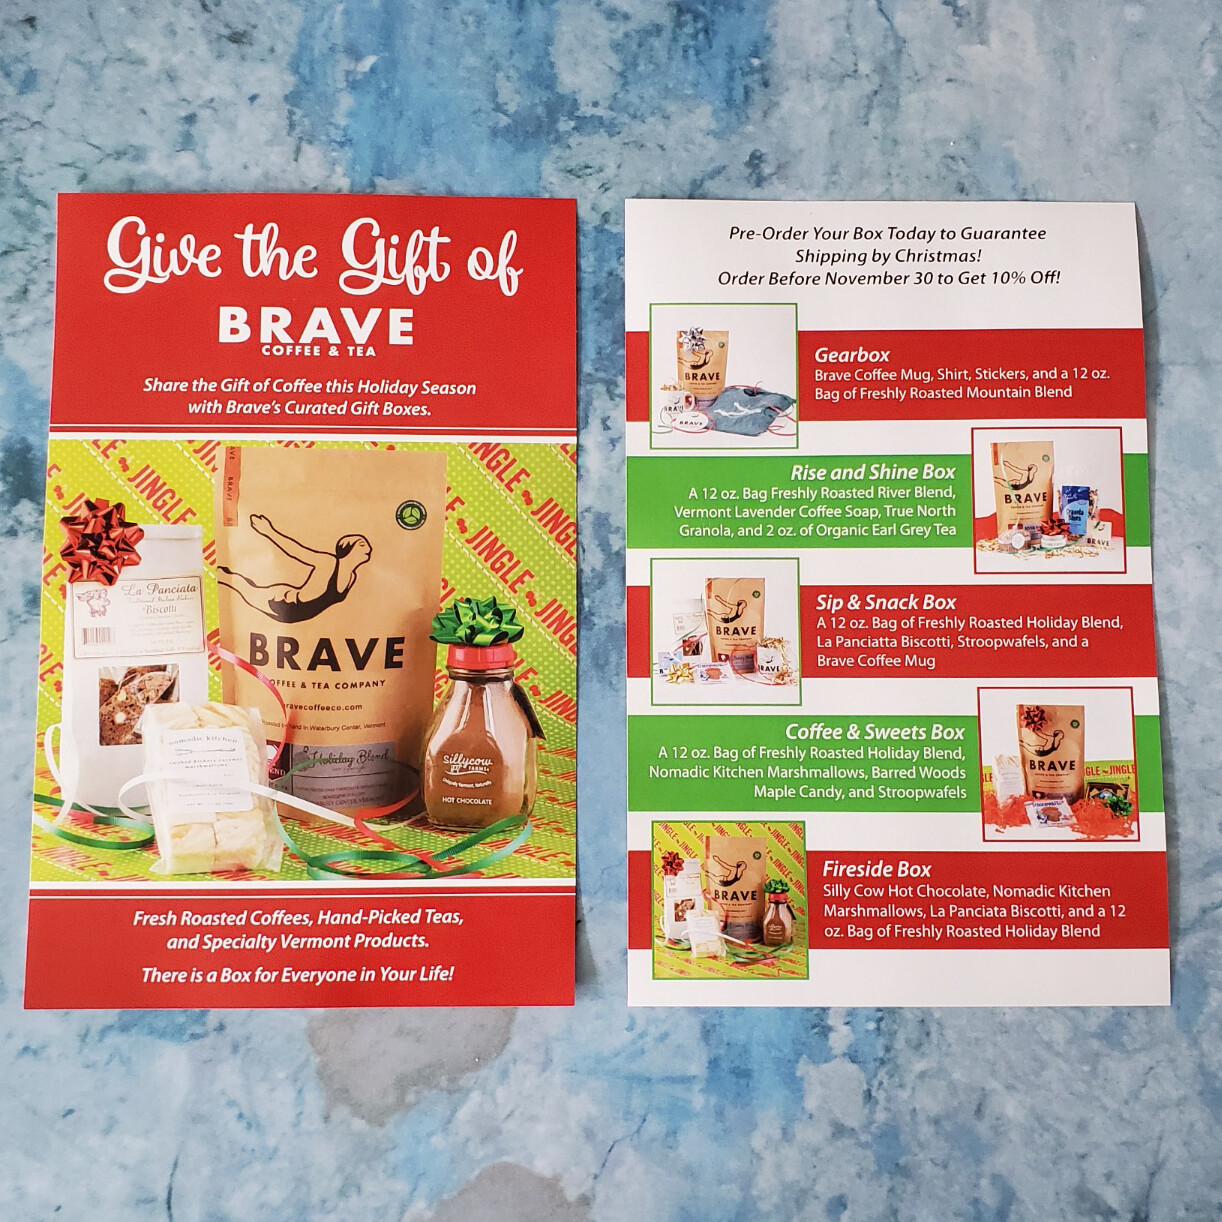 Printed holiday flyer for Brave Coffee